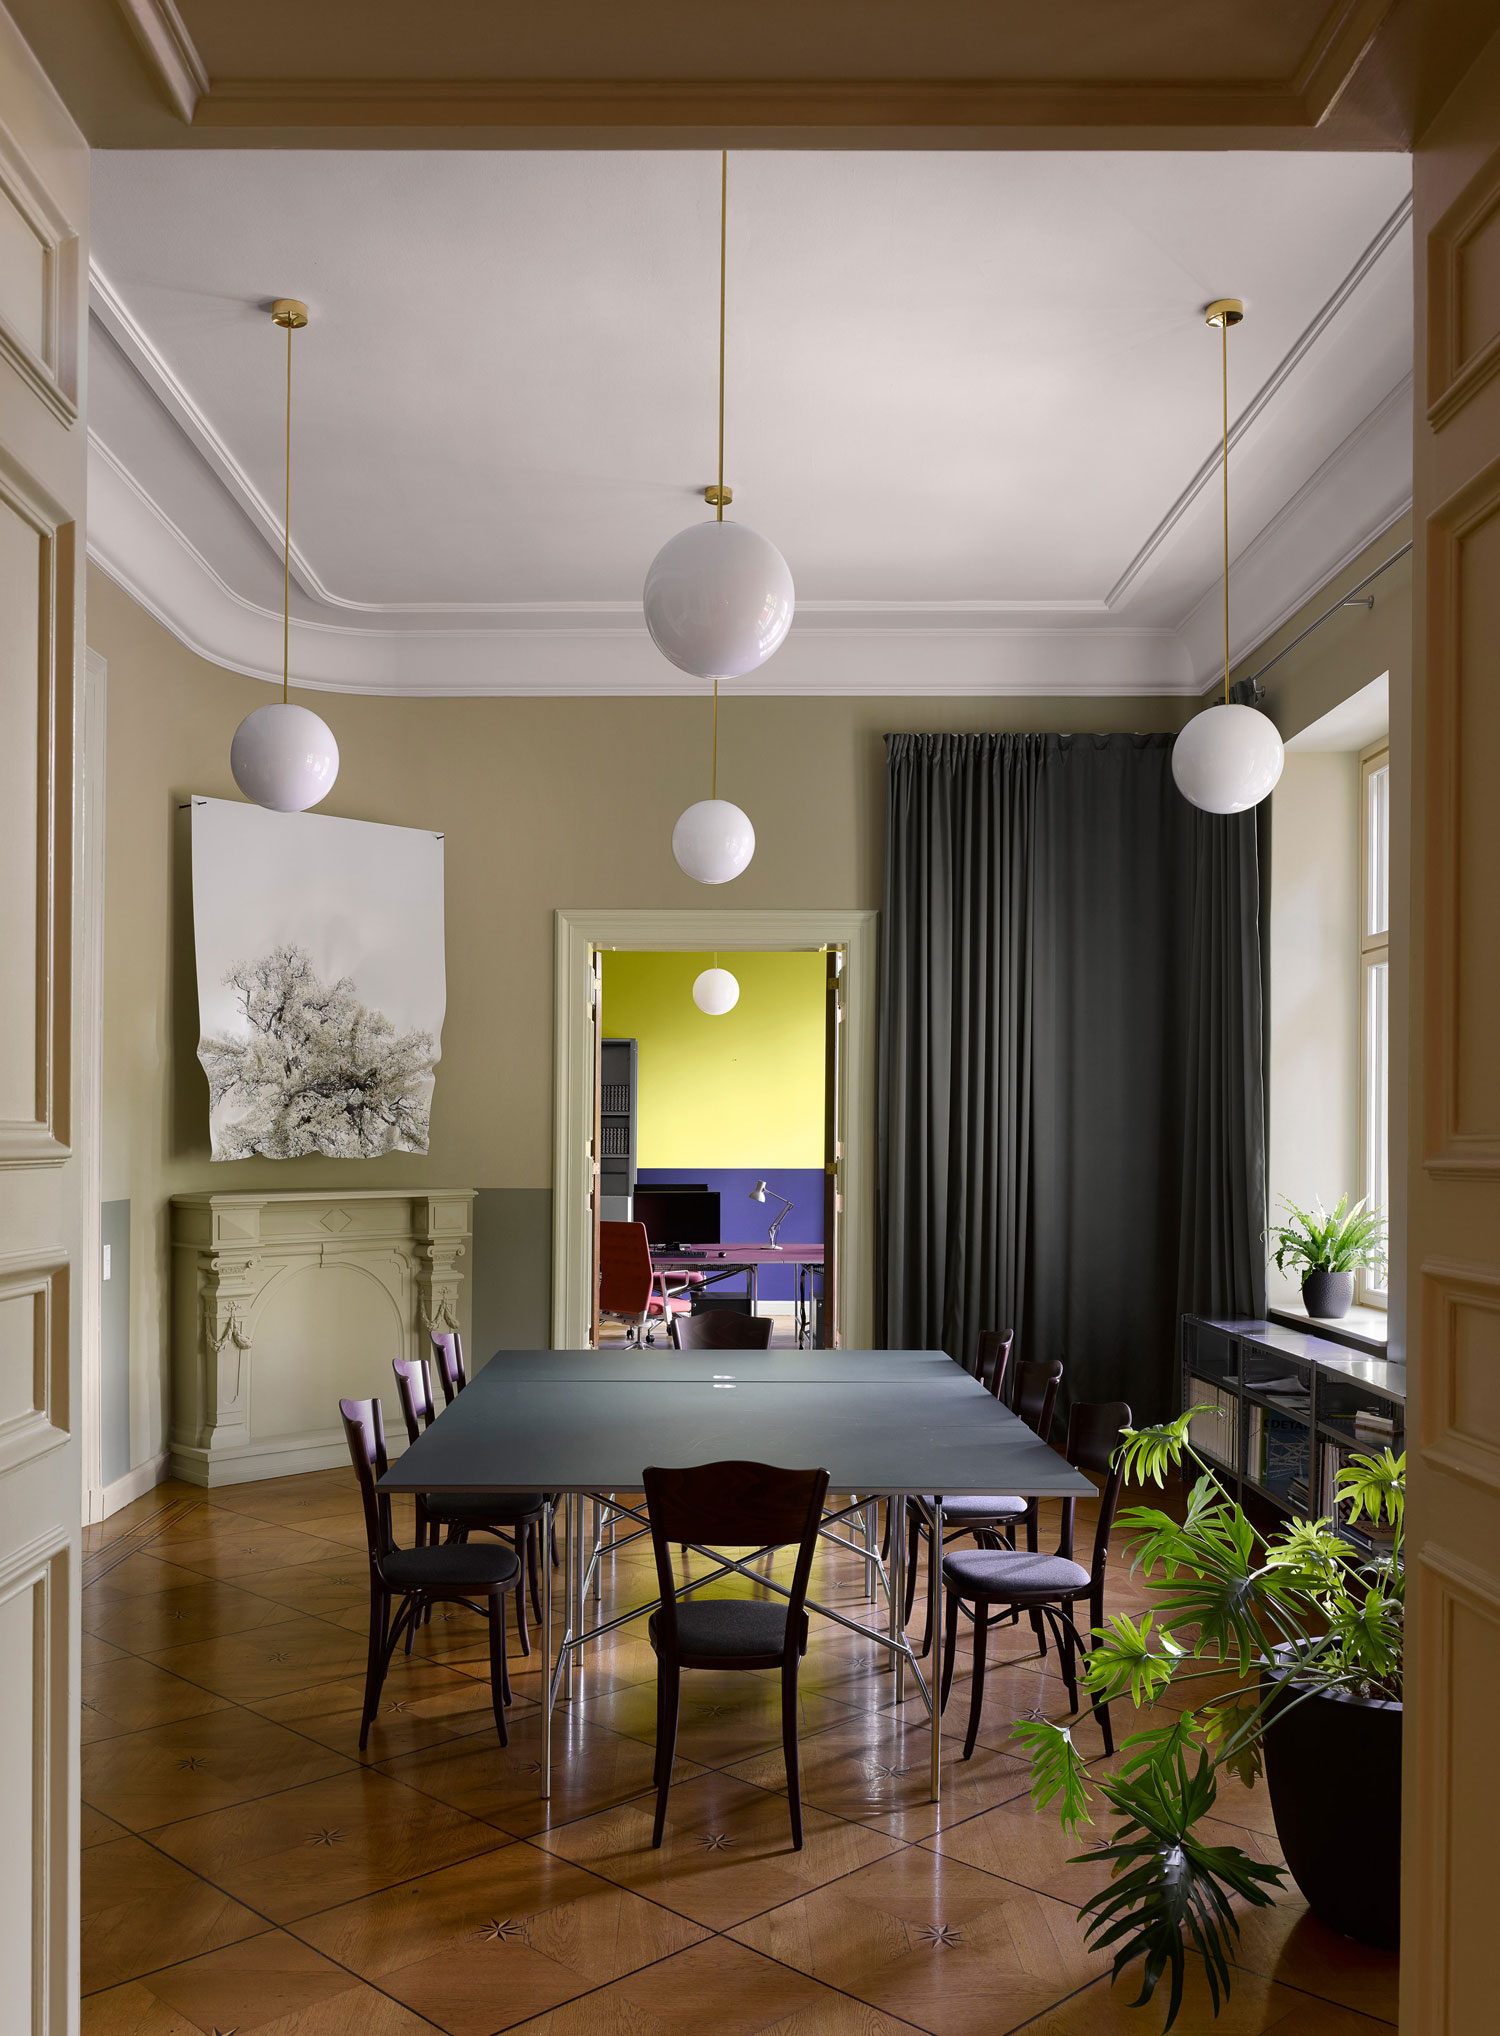 Grand C19th Palais in Berlin Reimagined as an Office by David Kohn Architects.-1